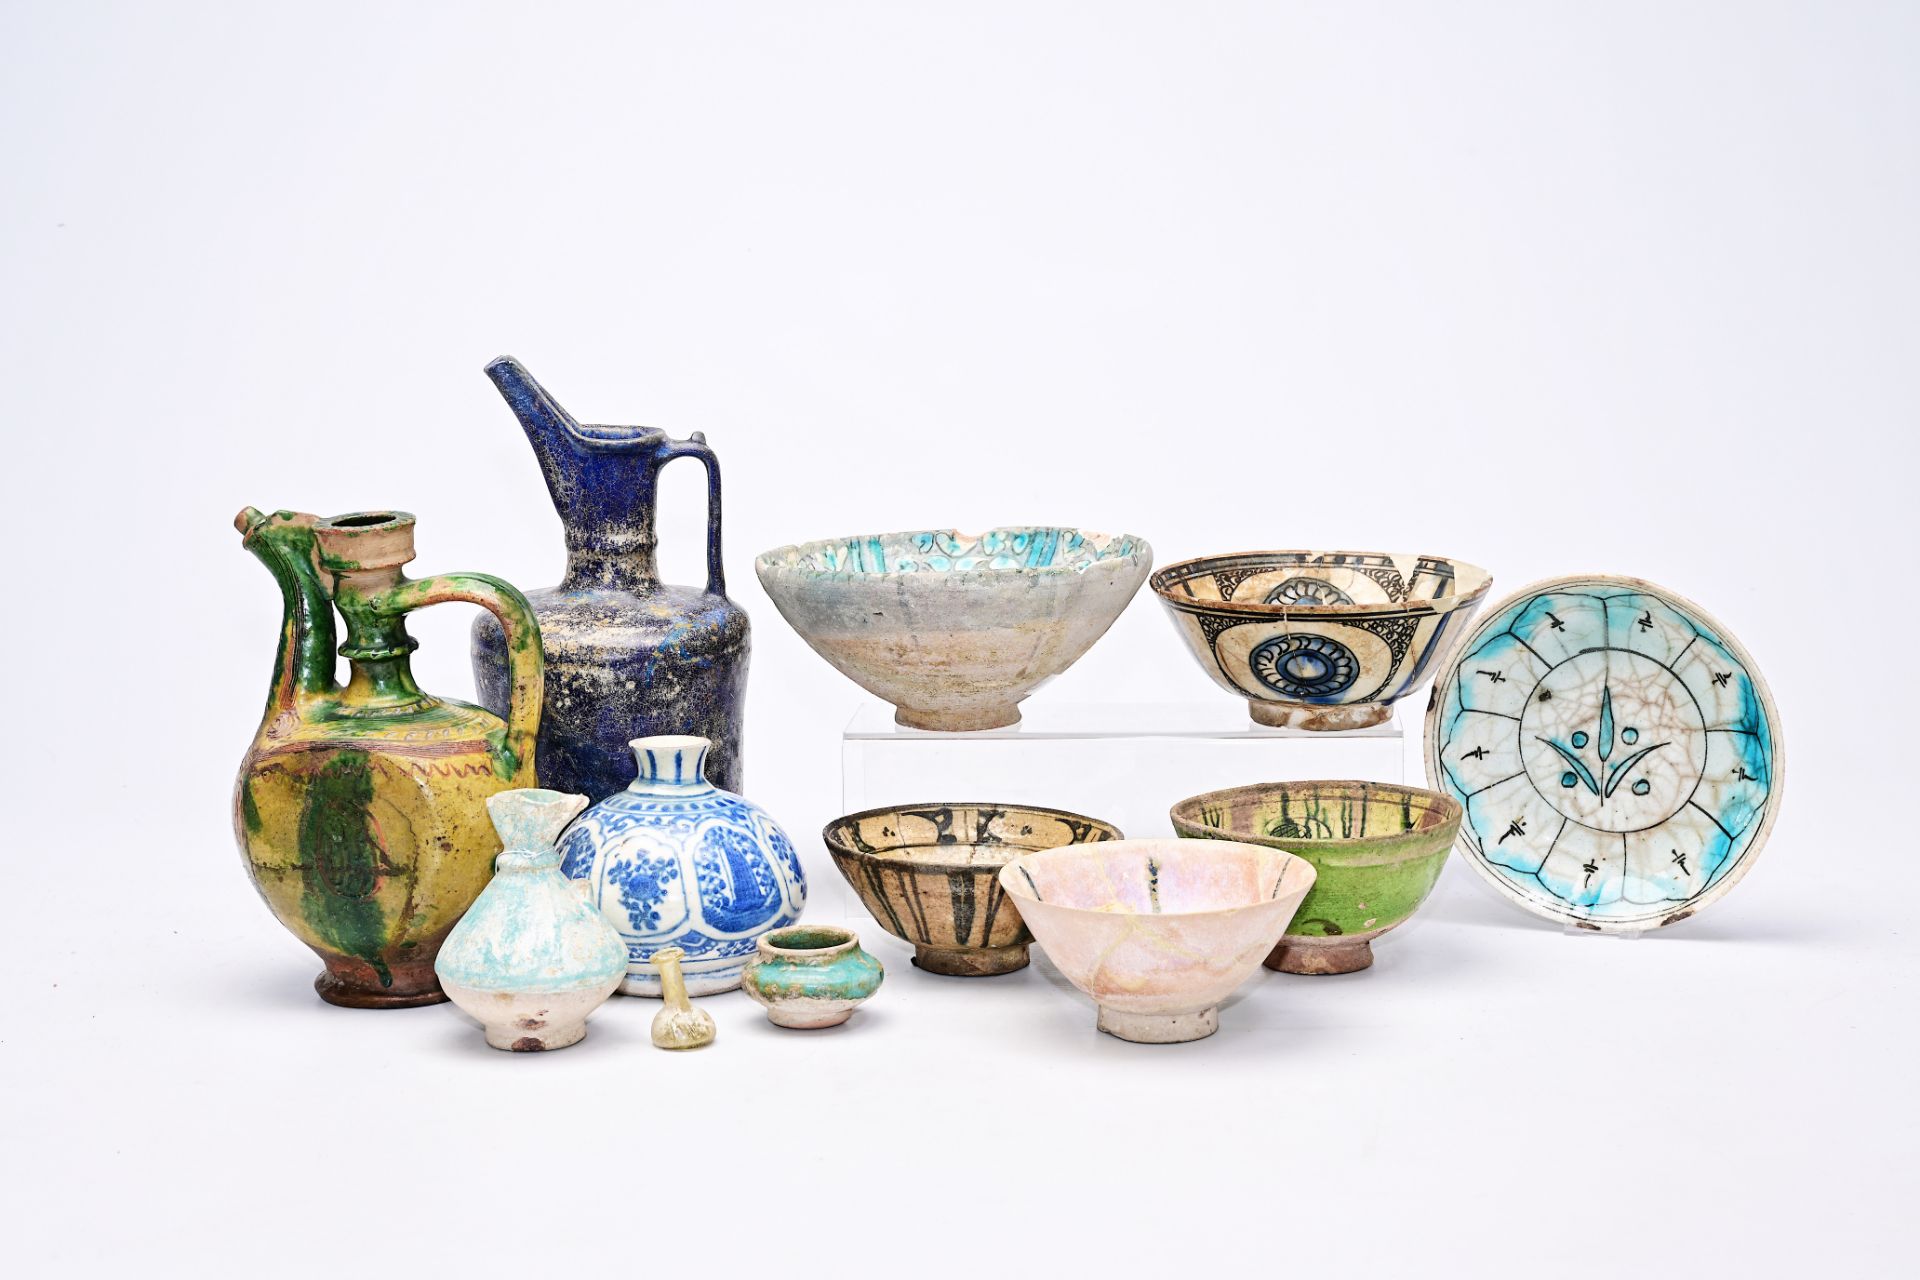 Twelve Ottoman and Persian pottery wares, 13th C. and later - Bild 2 aus 34